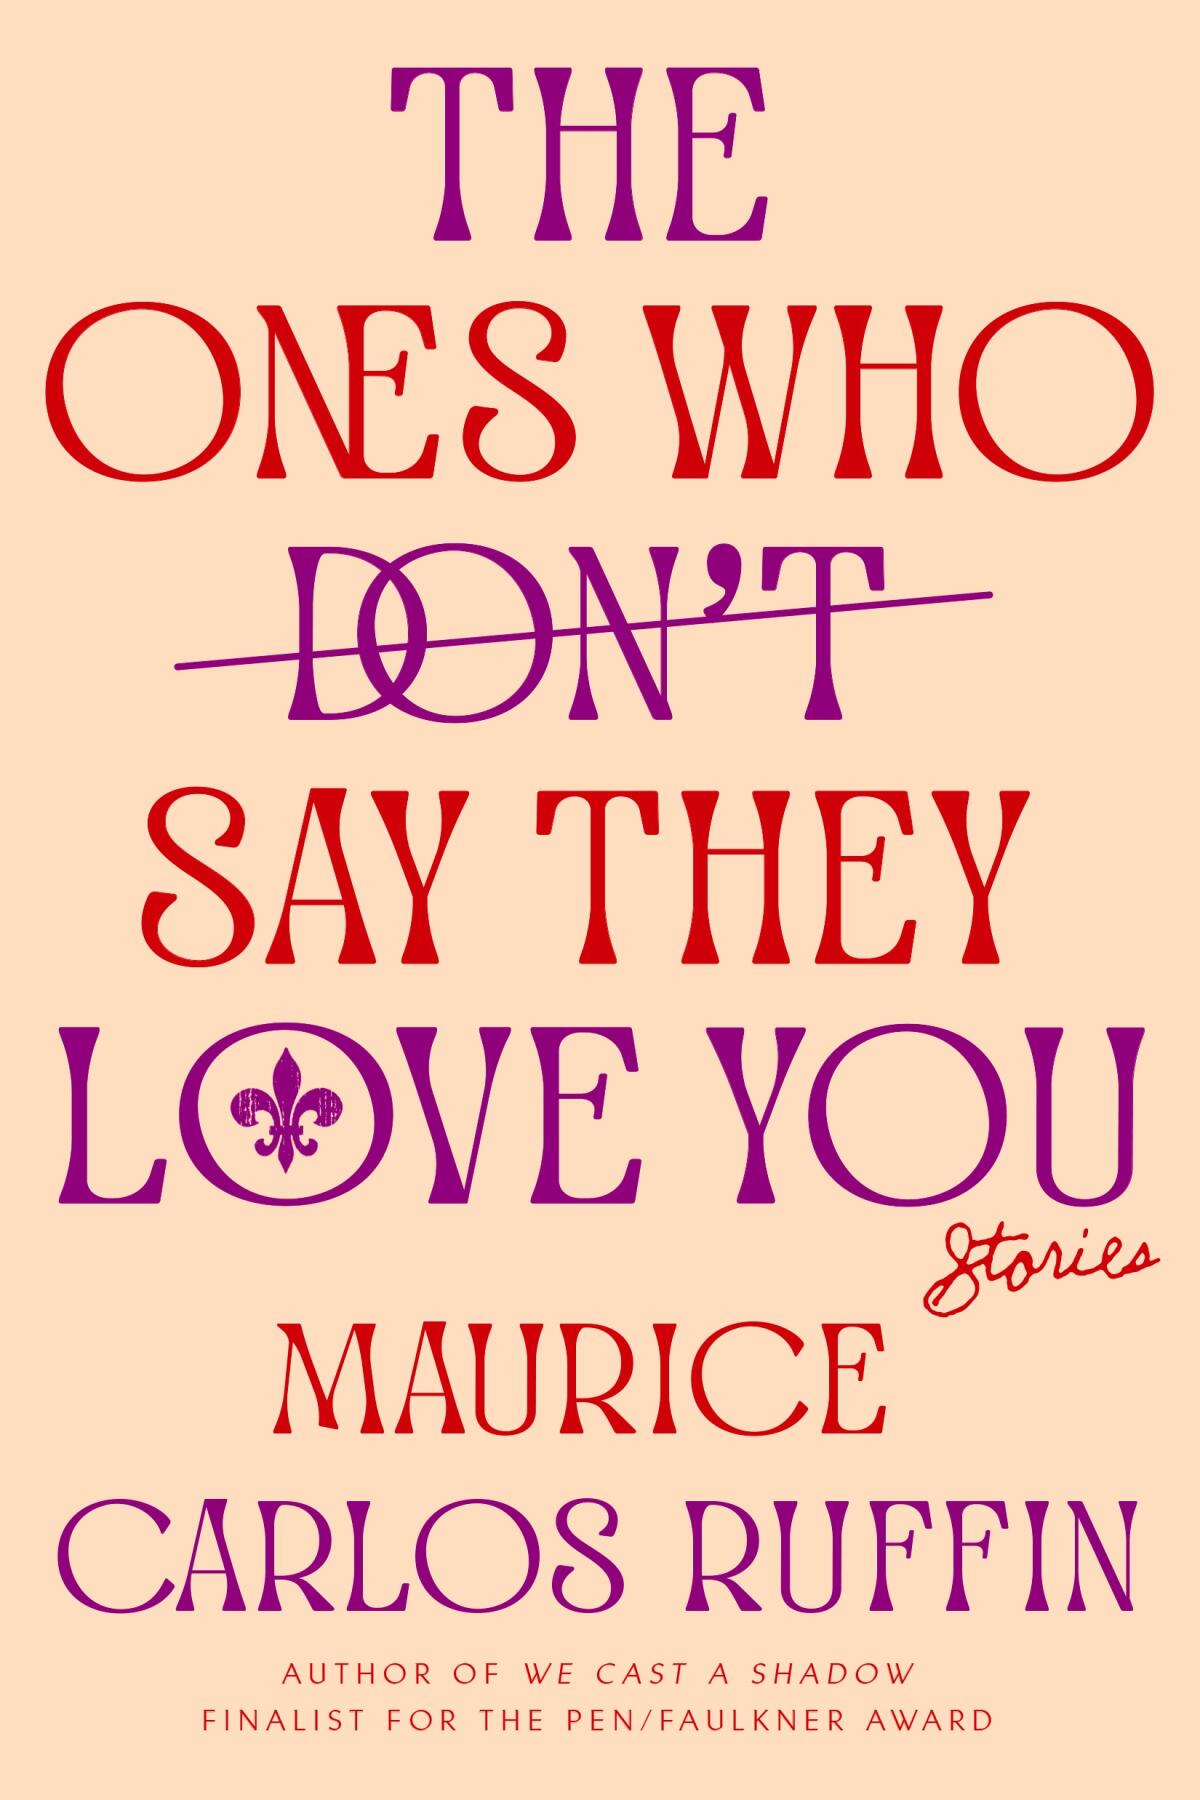 The cover of the book "The Ones Who Don't Say They Love You," by Maurice Carlos Ruffin